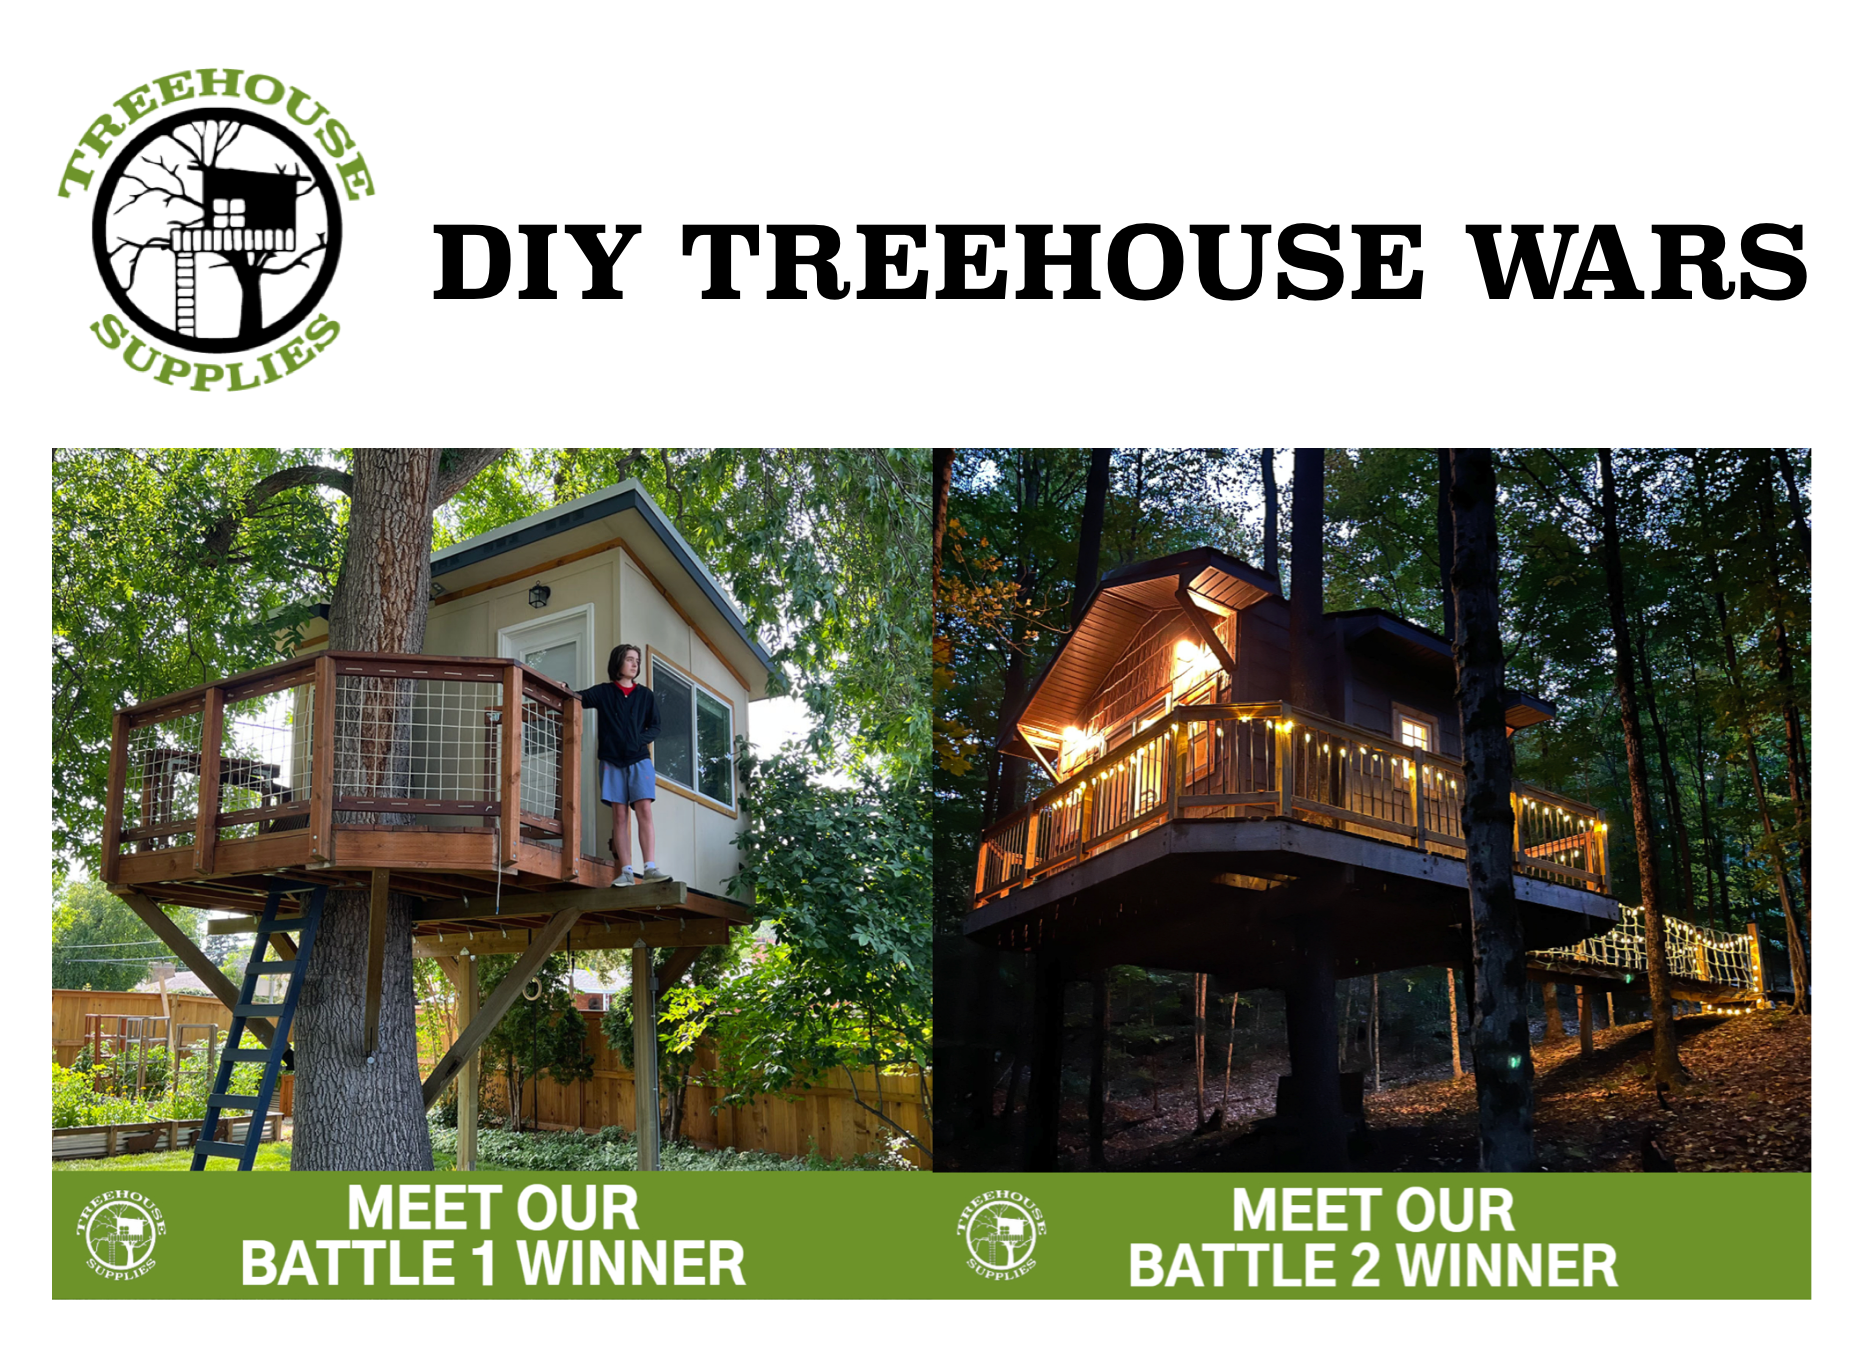 DIY Treehouse Wars by Treehouse Supplies: A Look Into The Semi-Finals Battle 1 Treehouse Supplies